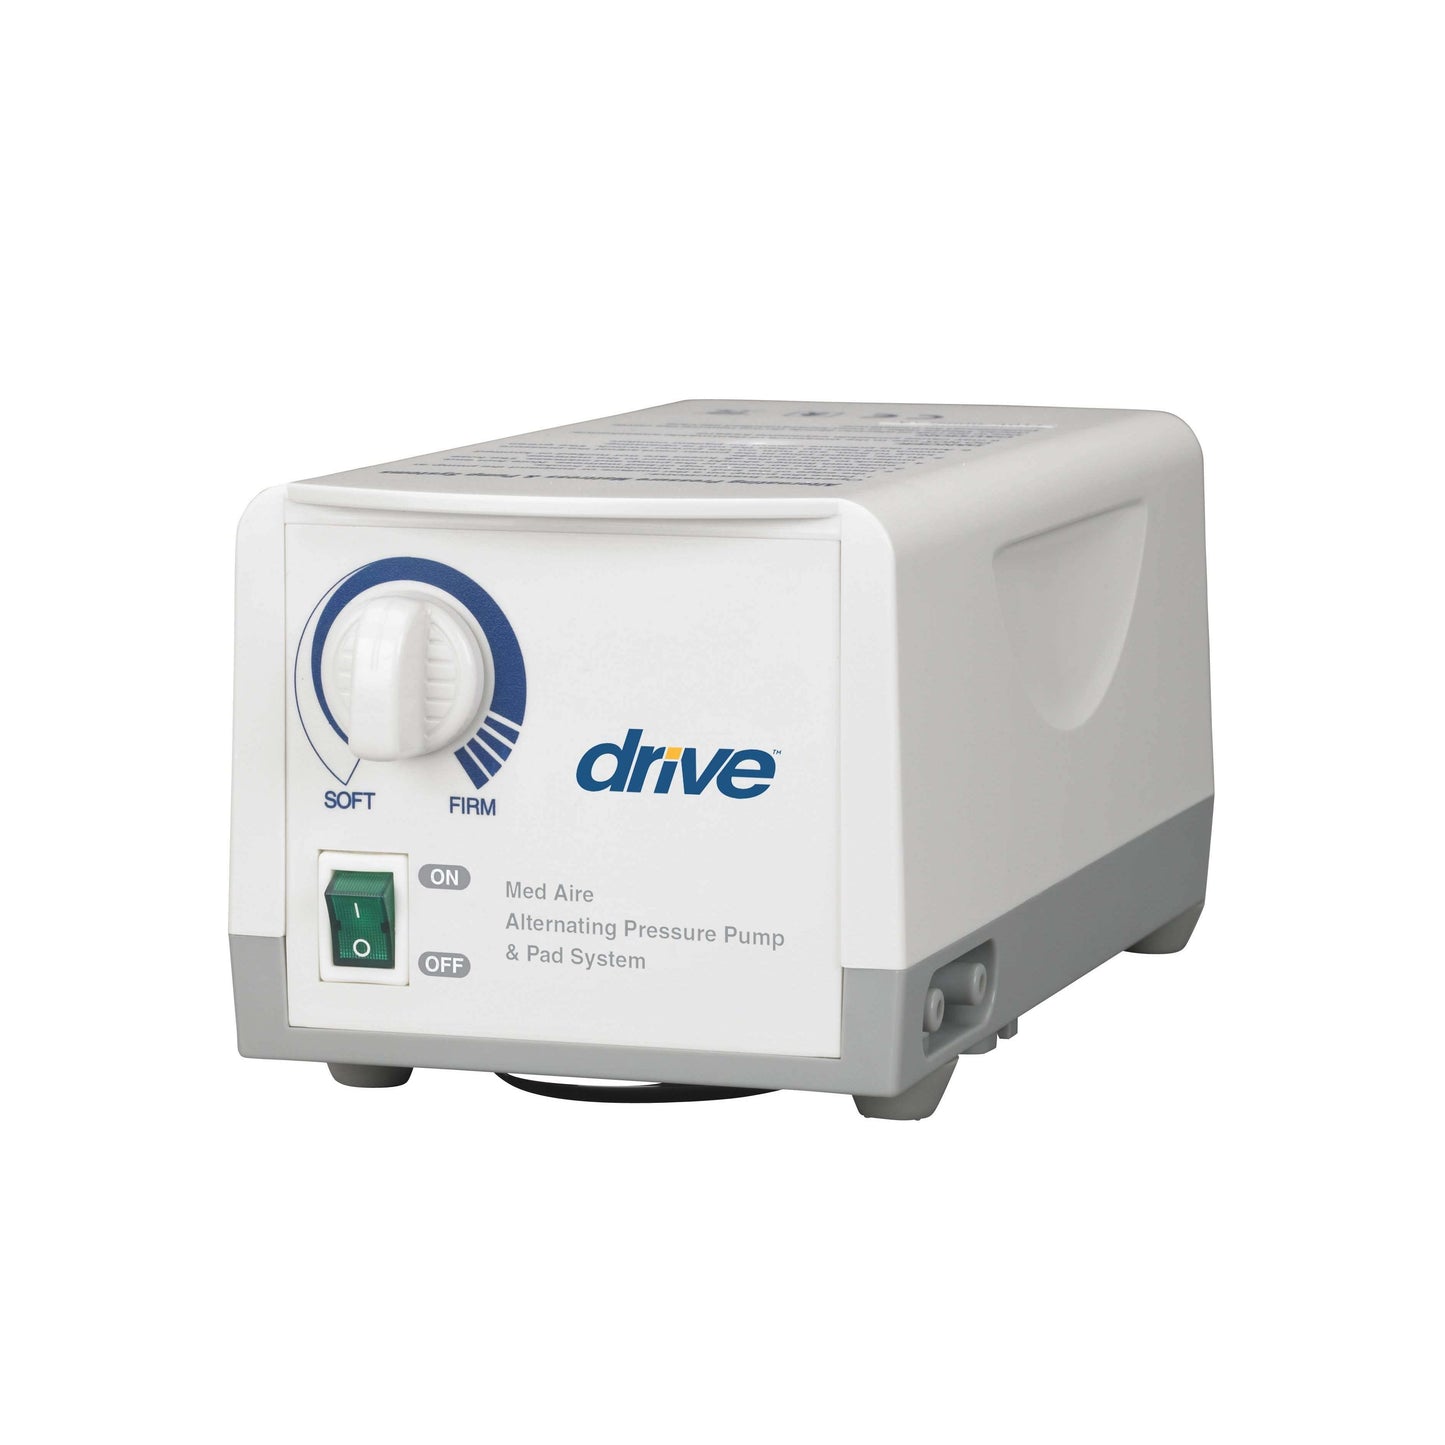 Drive 14005e Med Aire Variable Pressure Pump